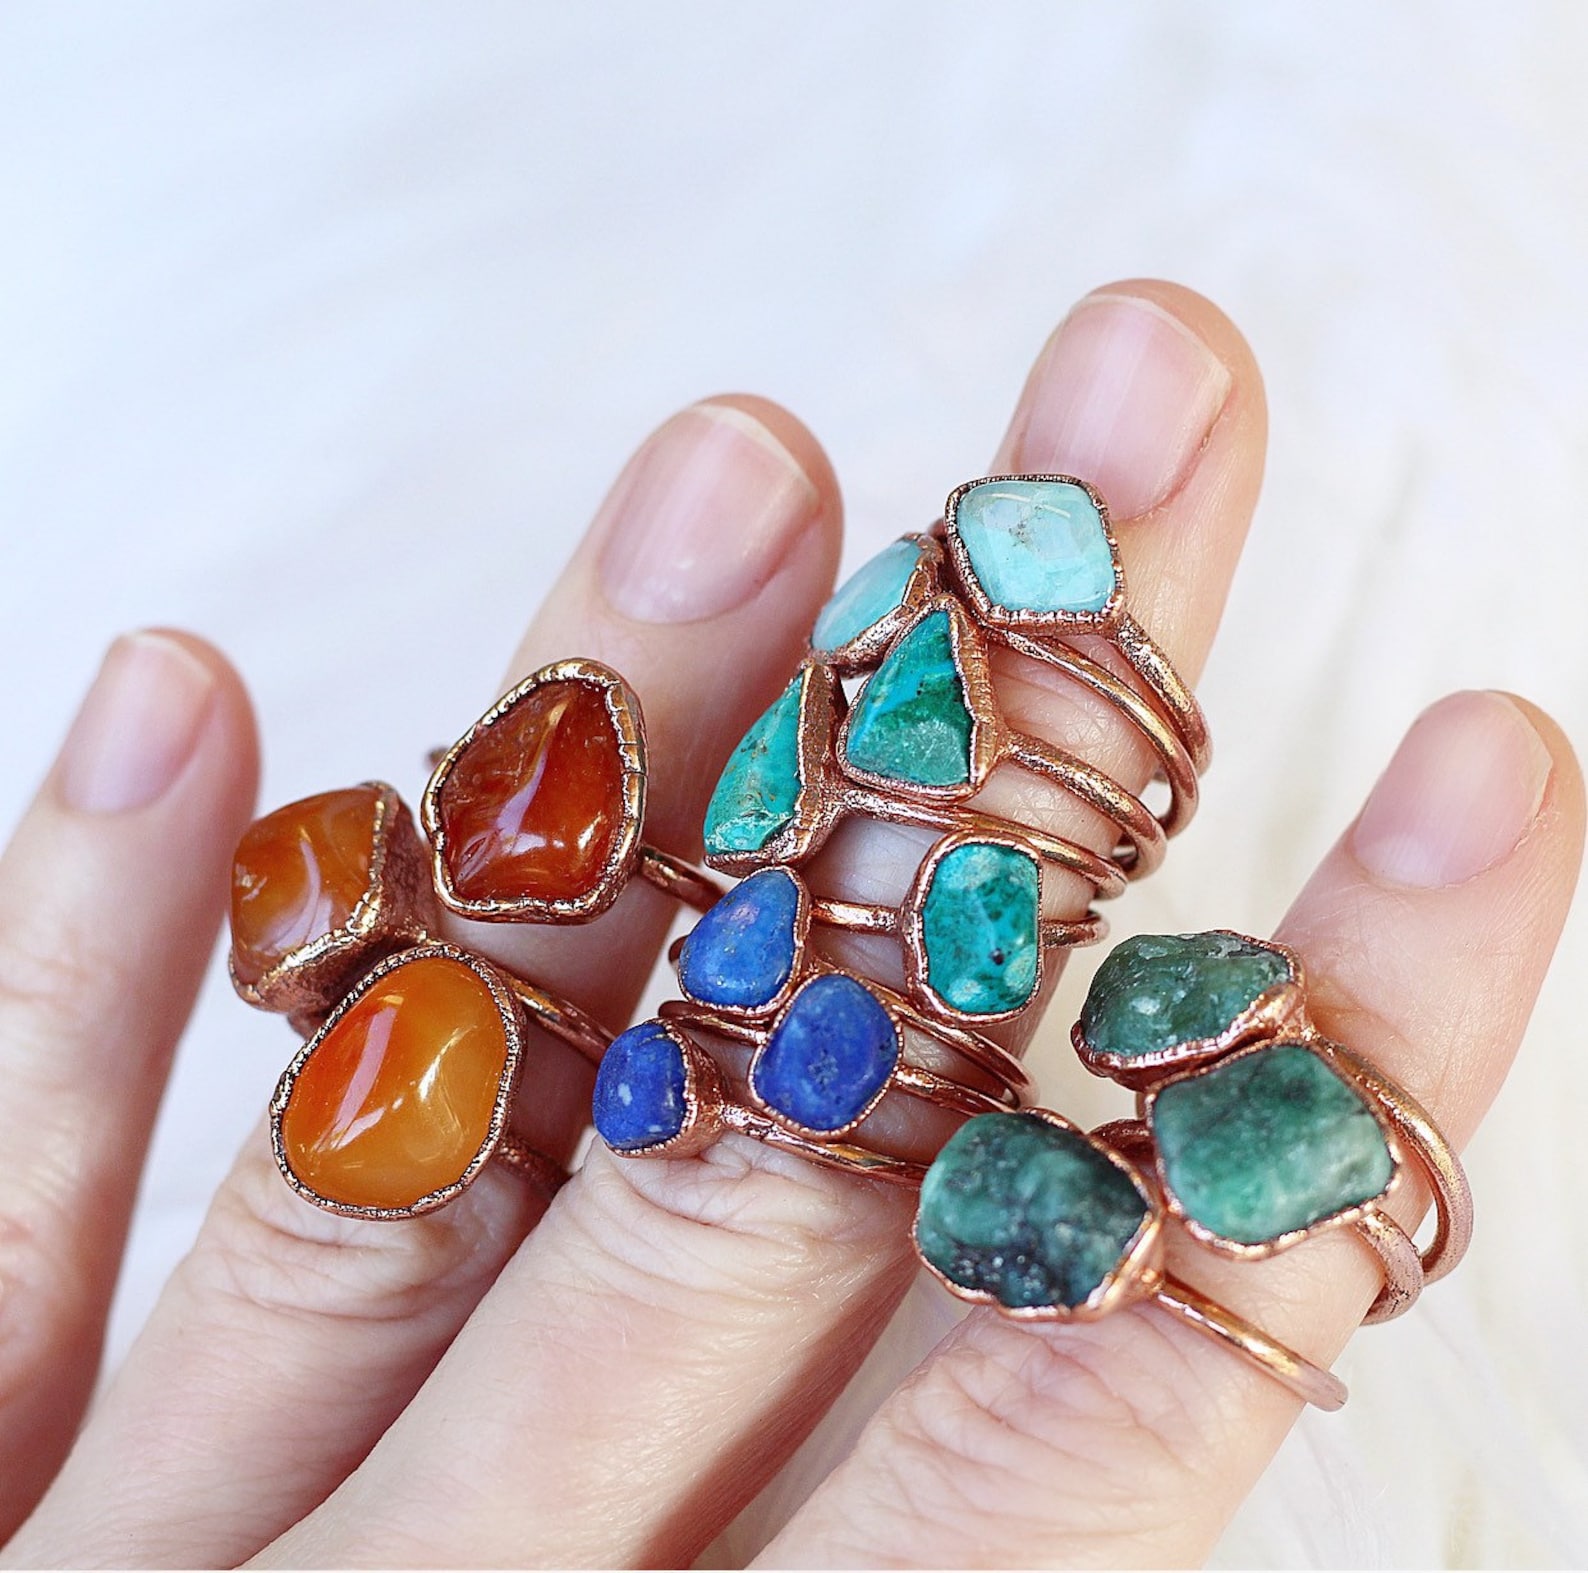 10+ Dainty or Giant Raw Crystal Rings (incl Engagement Rings)